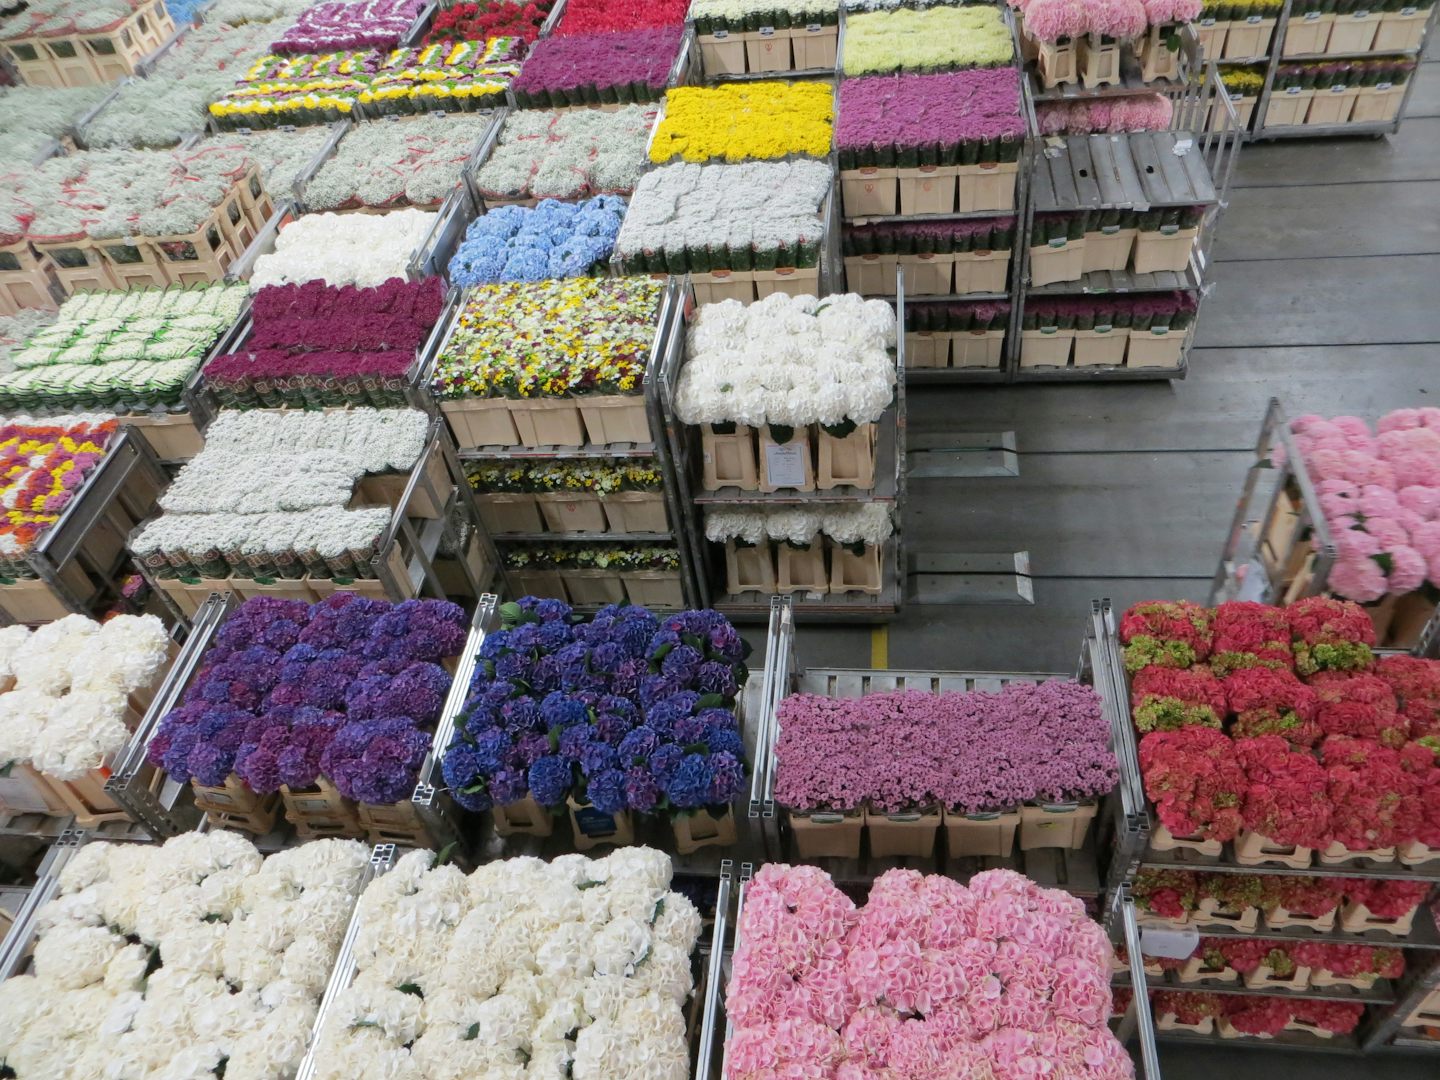 Visit to Flor Holland,near Amsleevan, flower auction and distribution facil